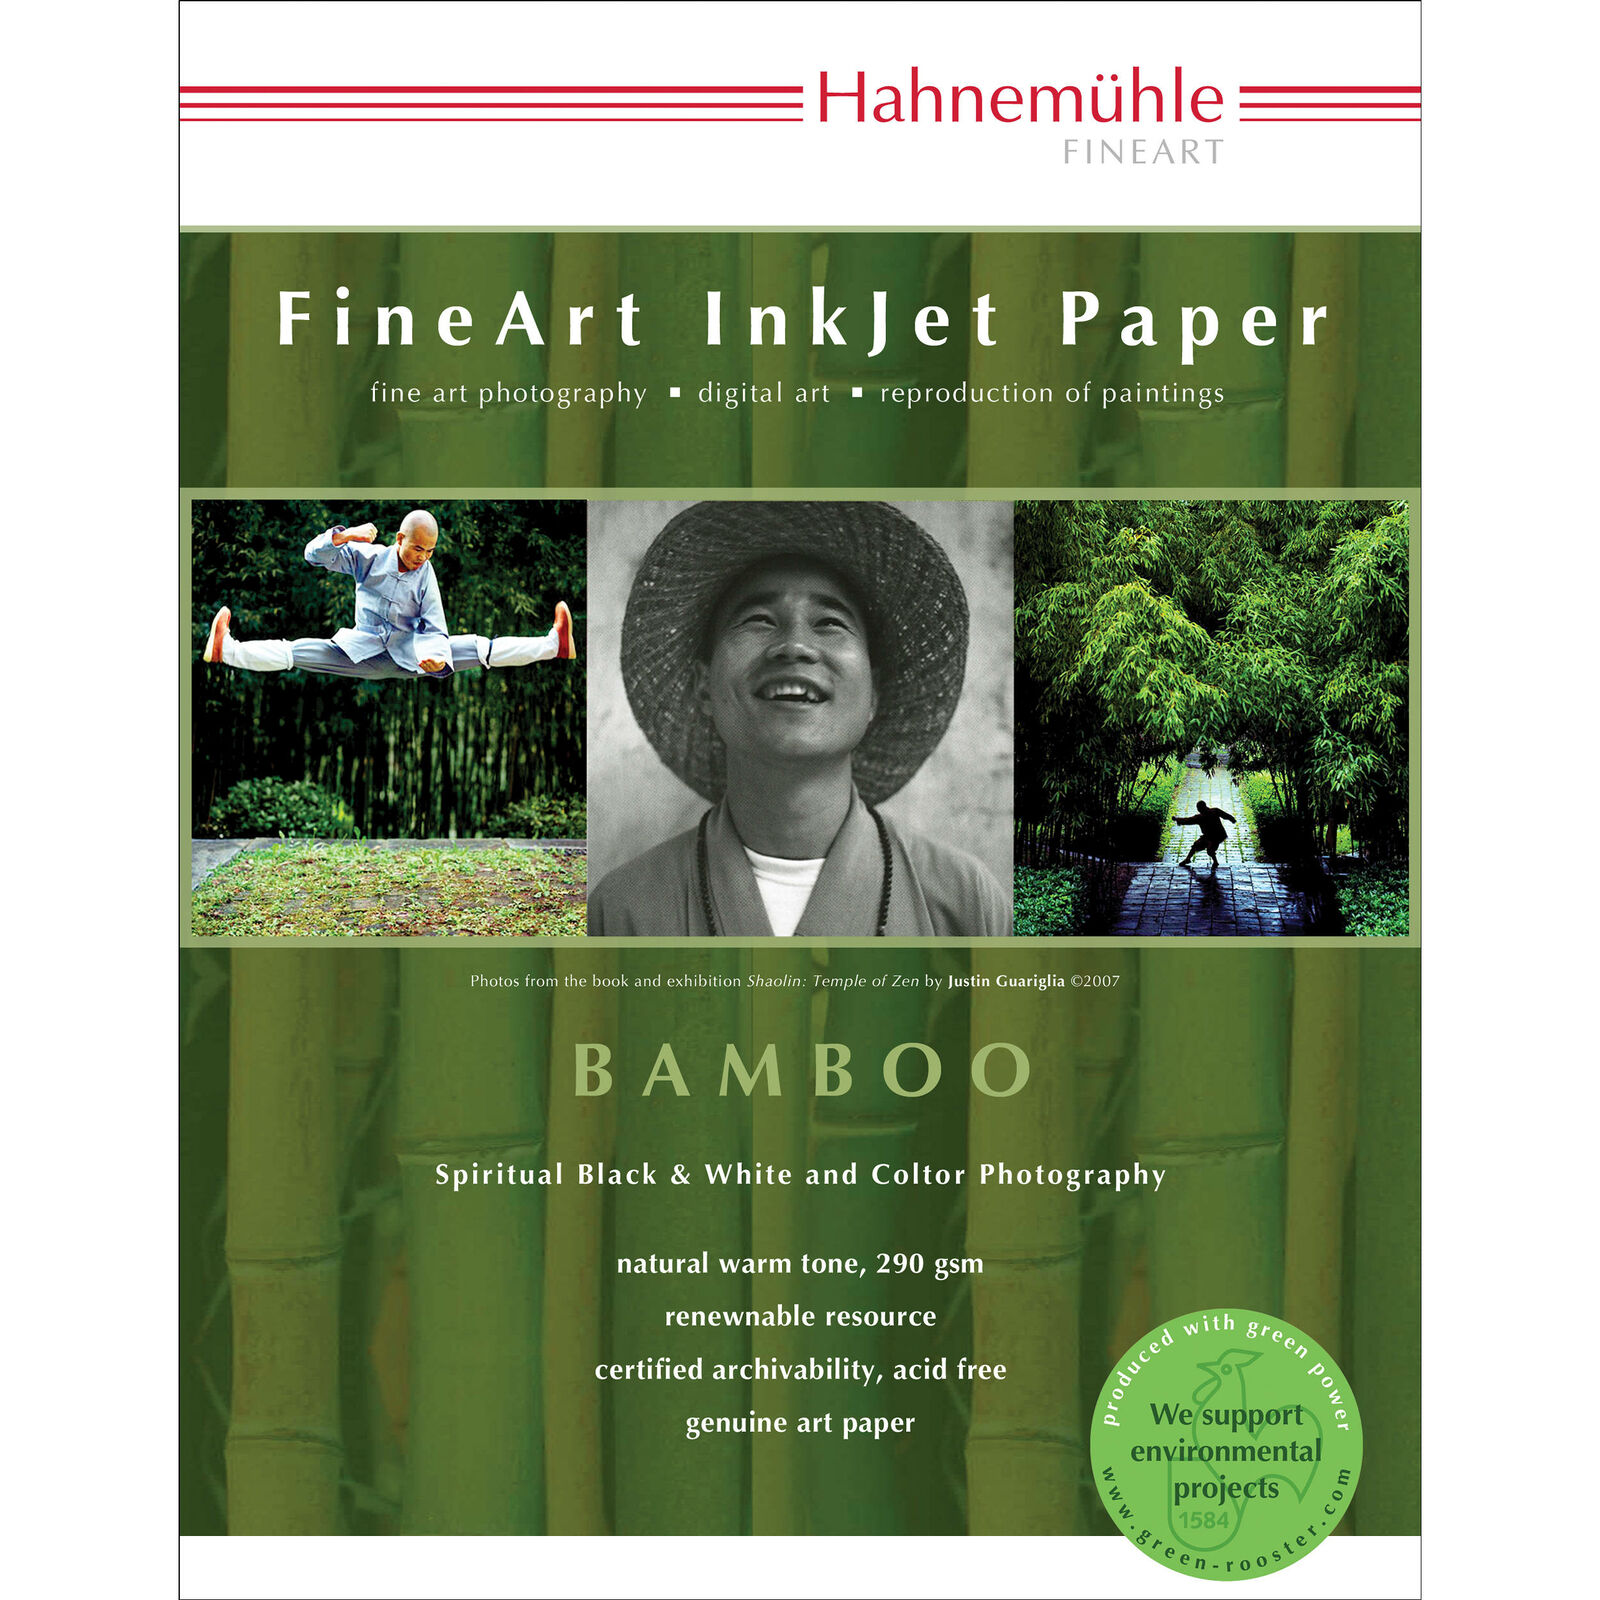 Hahnemuhle Bamboo FineArt Paper 290 gsm | 8.5 x 11